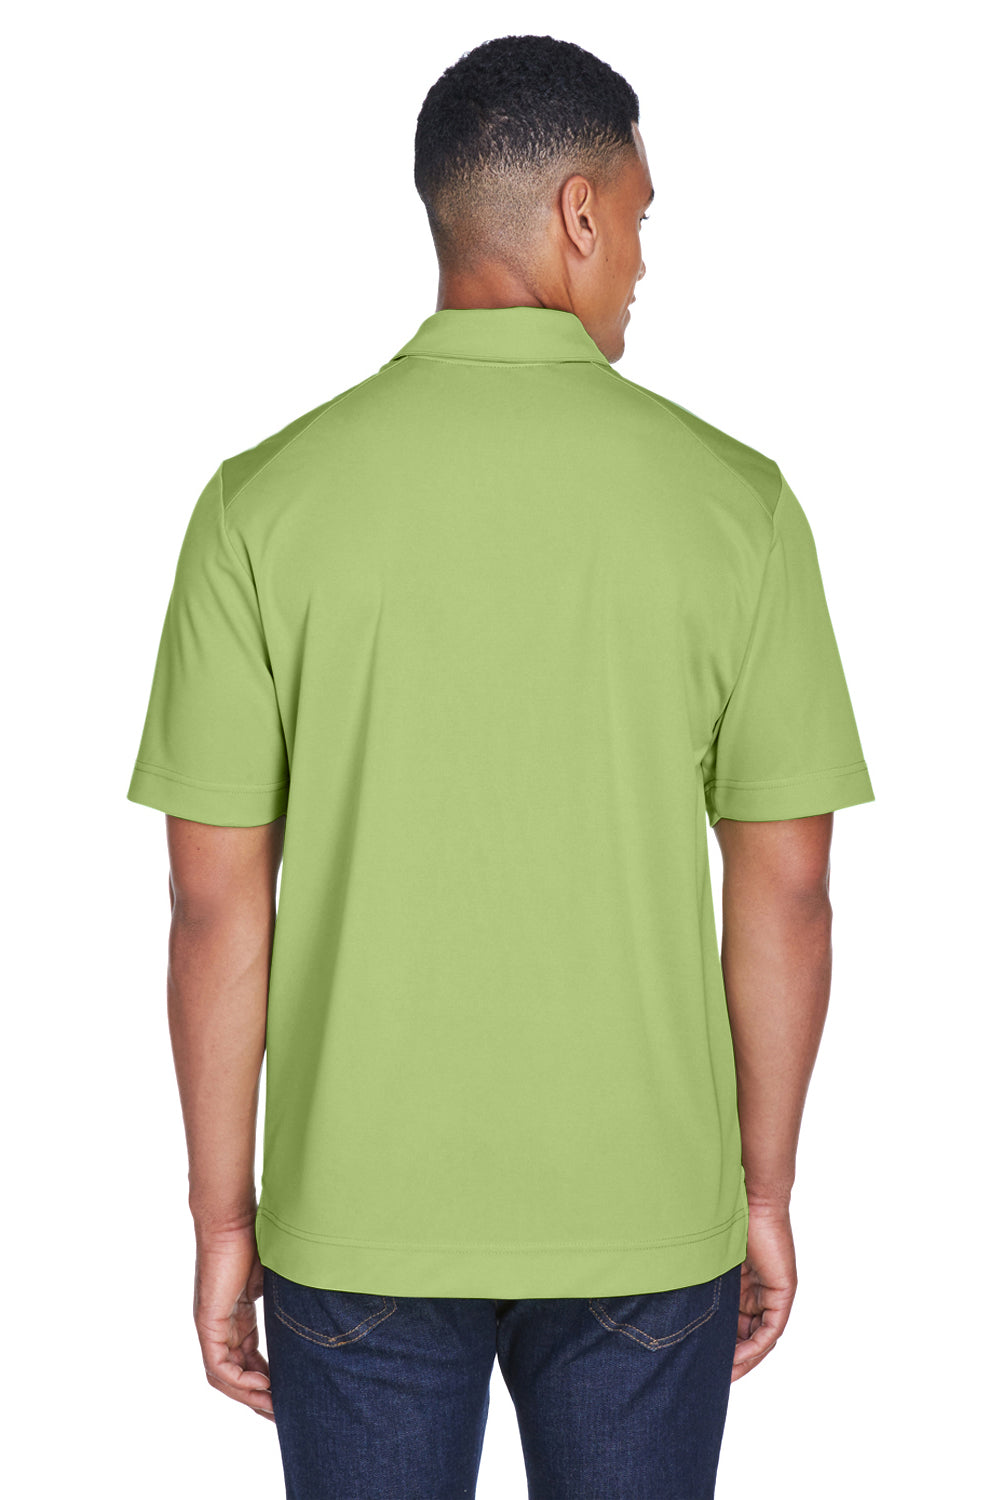 North End 88632 Mens Sport Red Performance Moisture Wicking Short Sleeve Polo Shirt Cactus Green Back